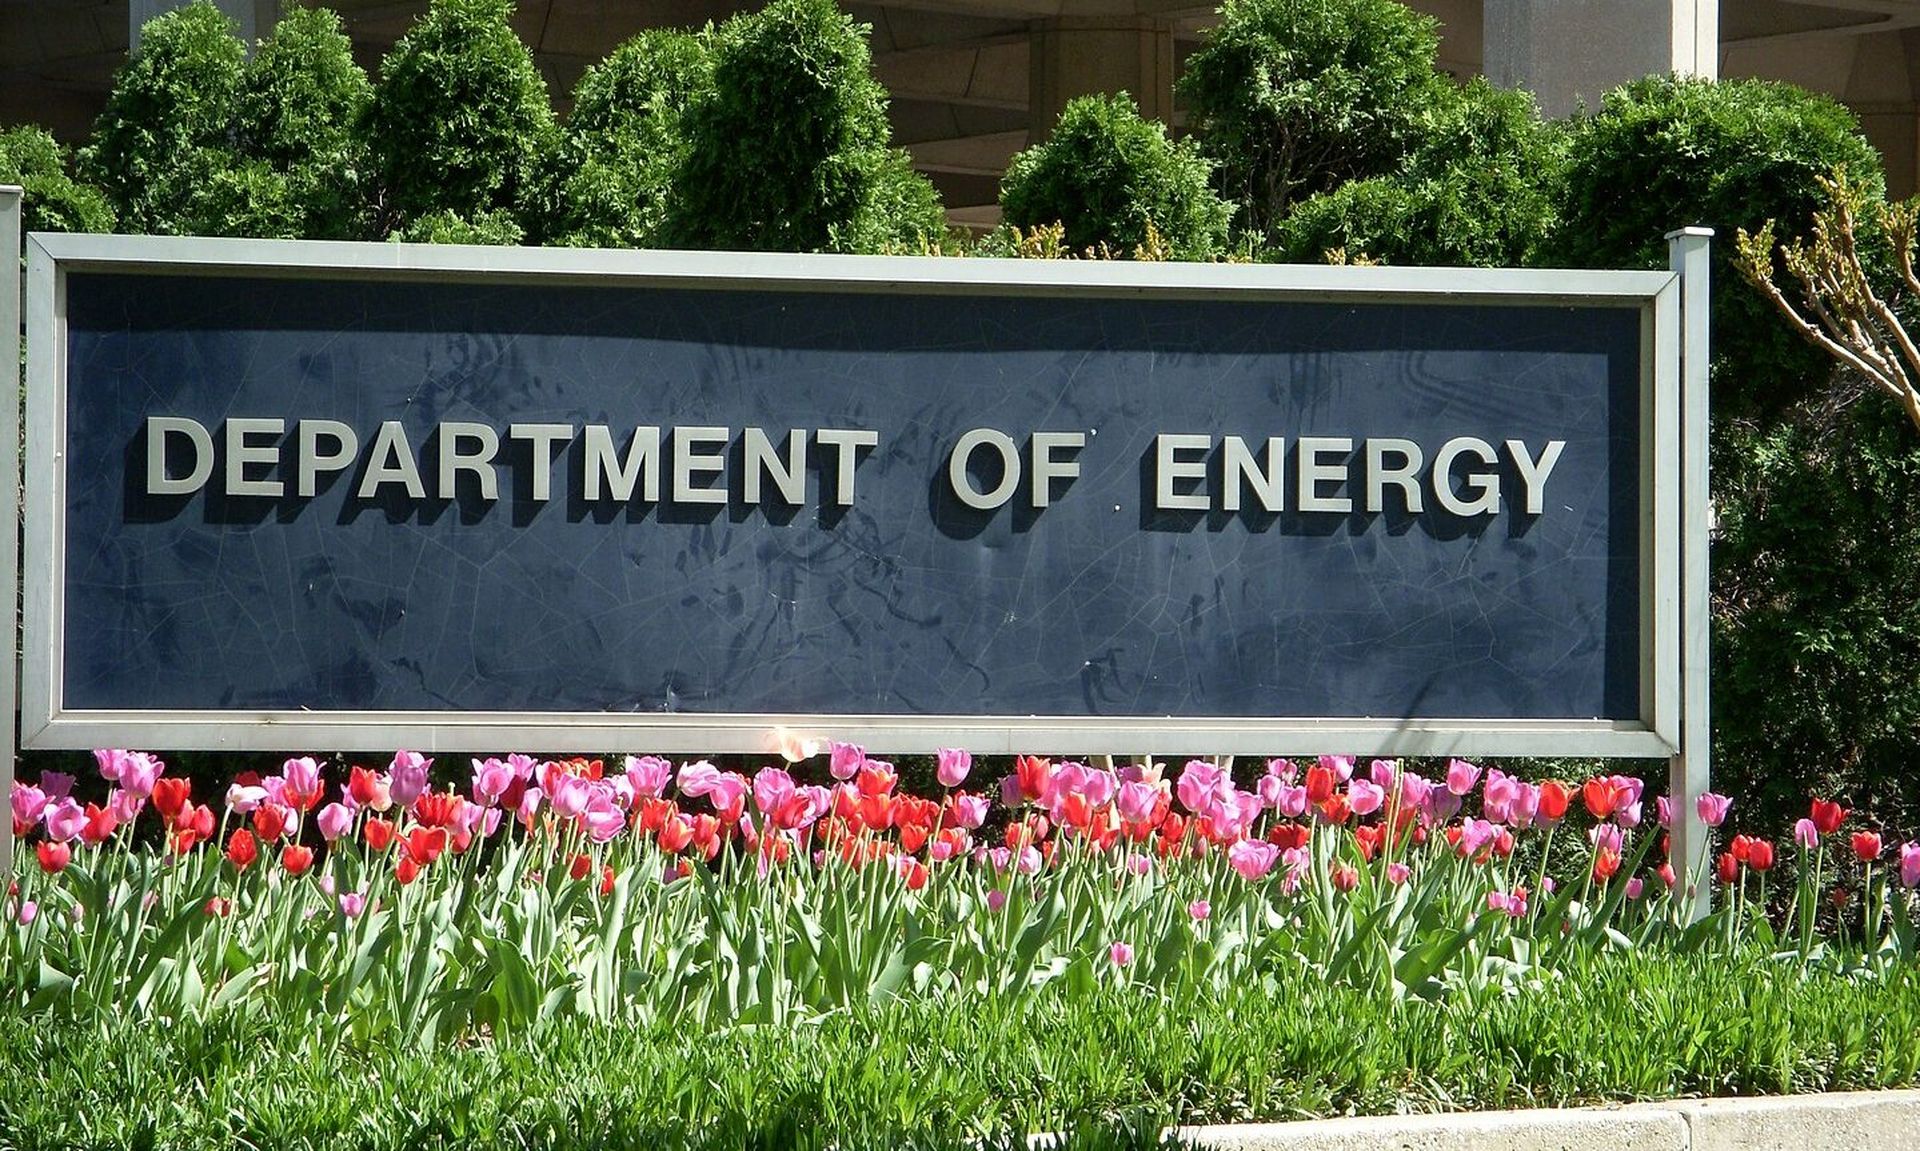 Sign at the James V. Forrestal Building — for the headquarters of the United States Department of Energy (DOE), in Southwest Washington, D.C. (JSquish, CC BY-SA 3.0 , via Wikimedia Commons)